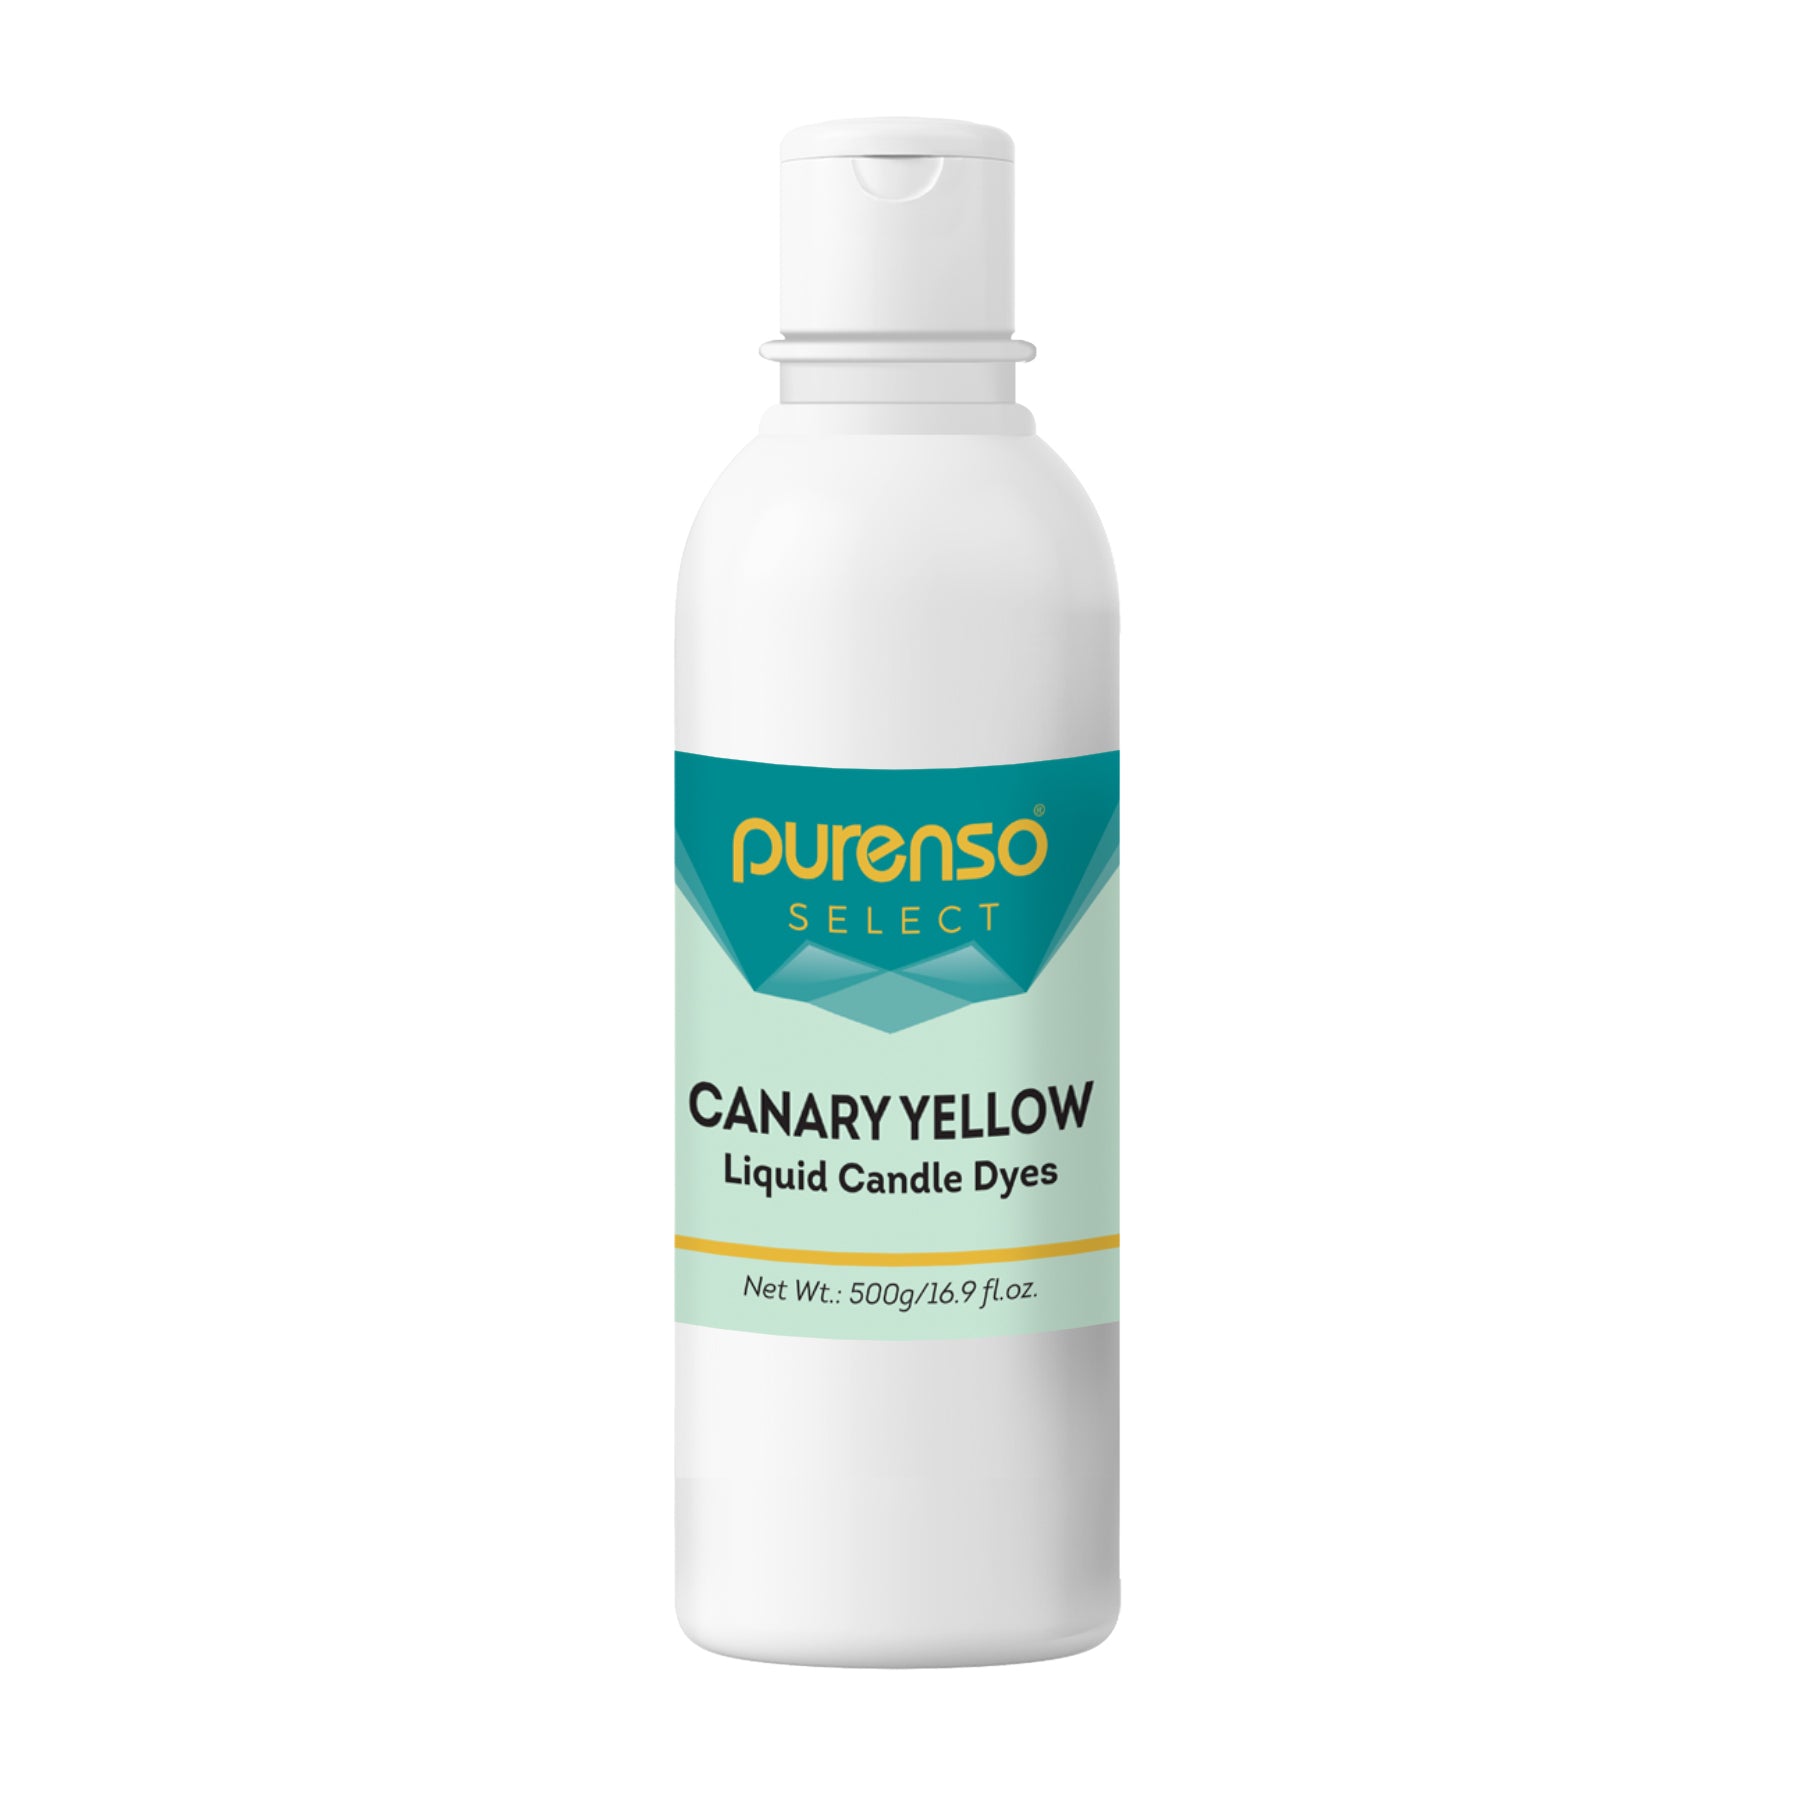 Canary Yellow - Liquid Candle Dyes